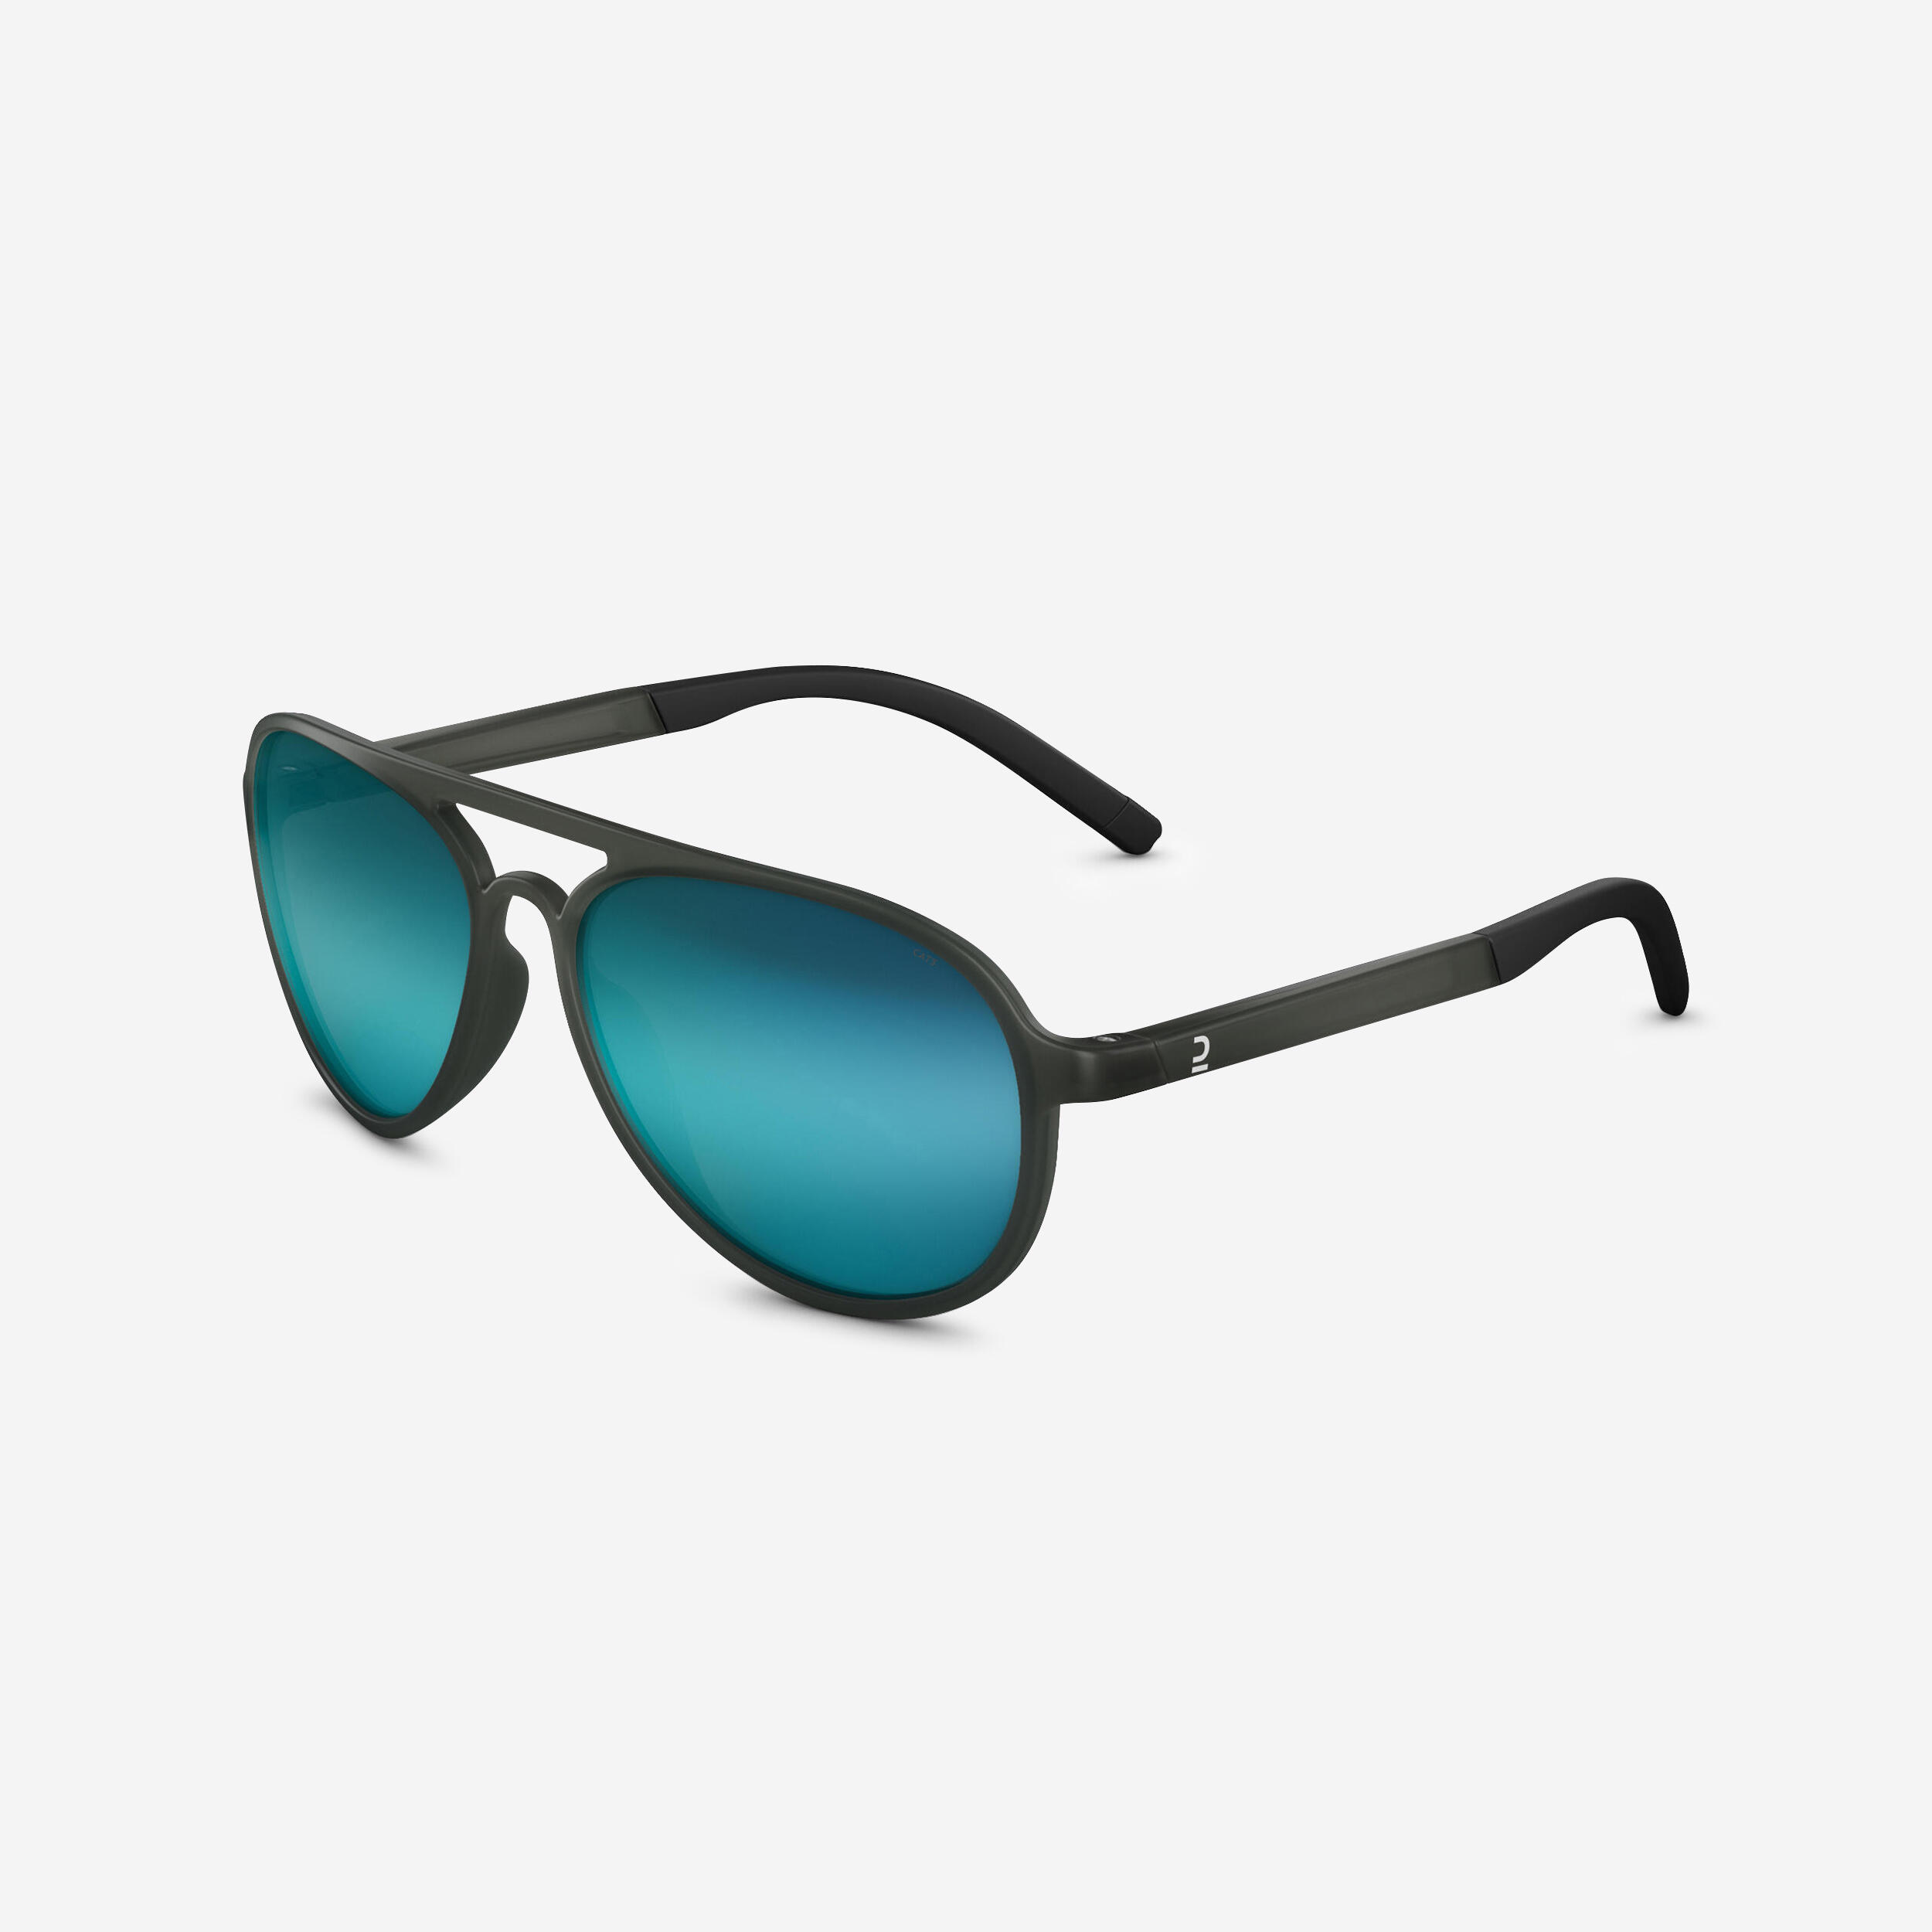 Hiking Sunglasses - MH120A - adult - category 3 blue 1/10